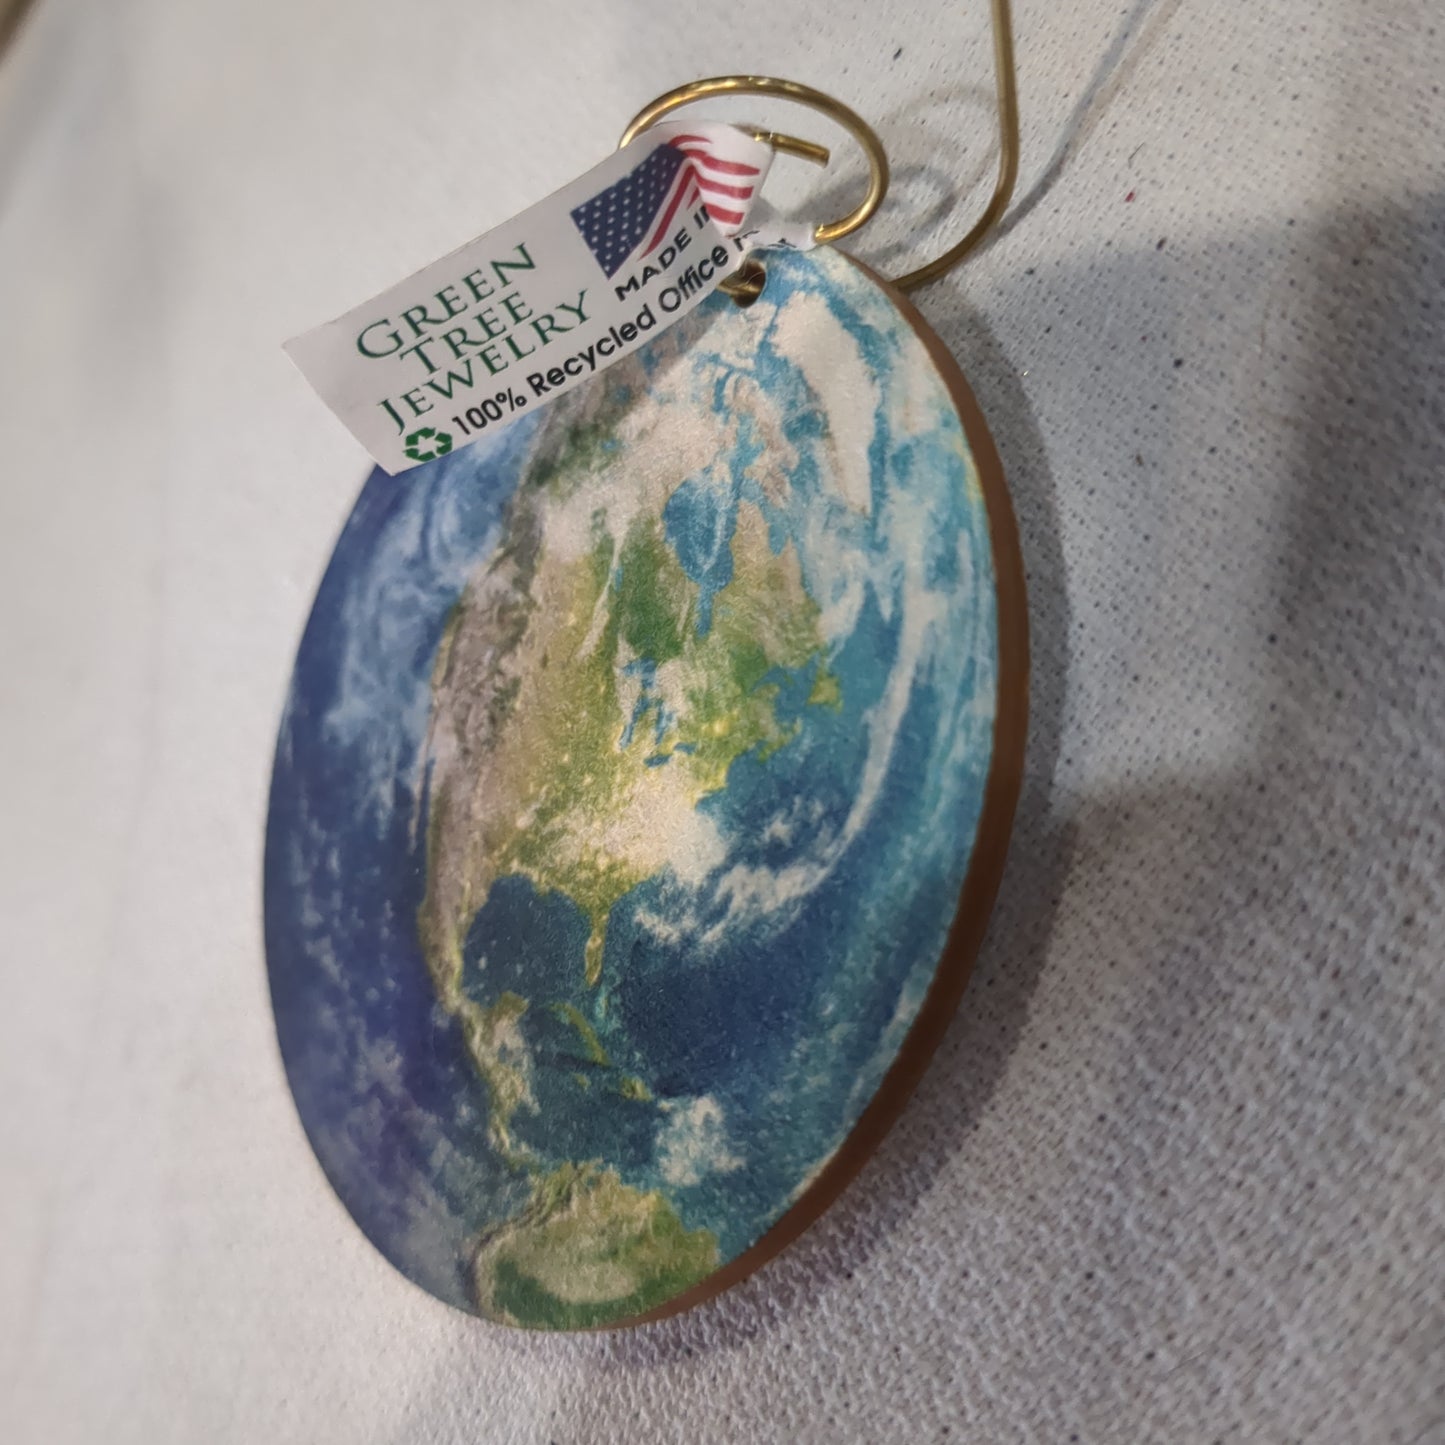 Mapped Earth Ornament 100% Recycled Paper